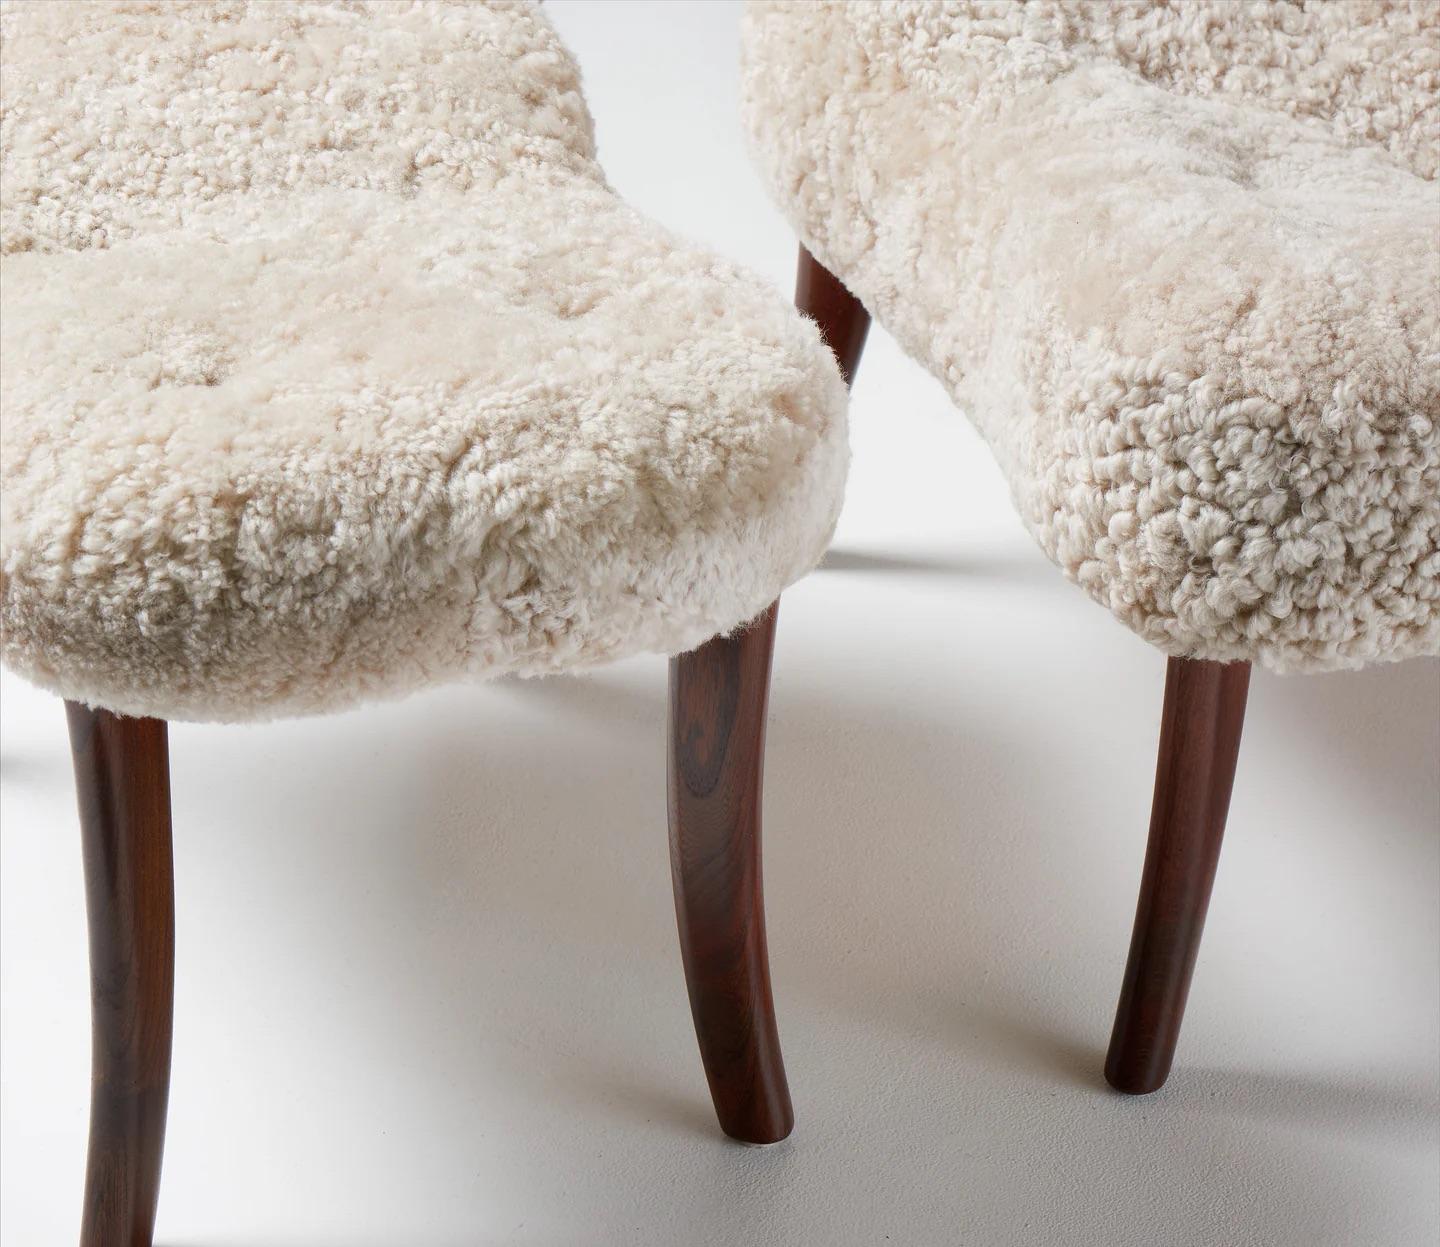 Arnold Madsen & Herny Schubell - The Pragh Foot Stool 

The Pragh chair is an iconic piece of Danish design from the mid-1950s golden period. The Pragh was the 2nd masterpiece Madsen & Schubell's produced shortly after the first: The Clam Chair in